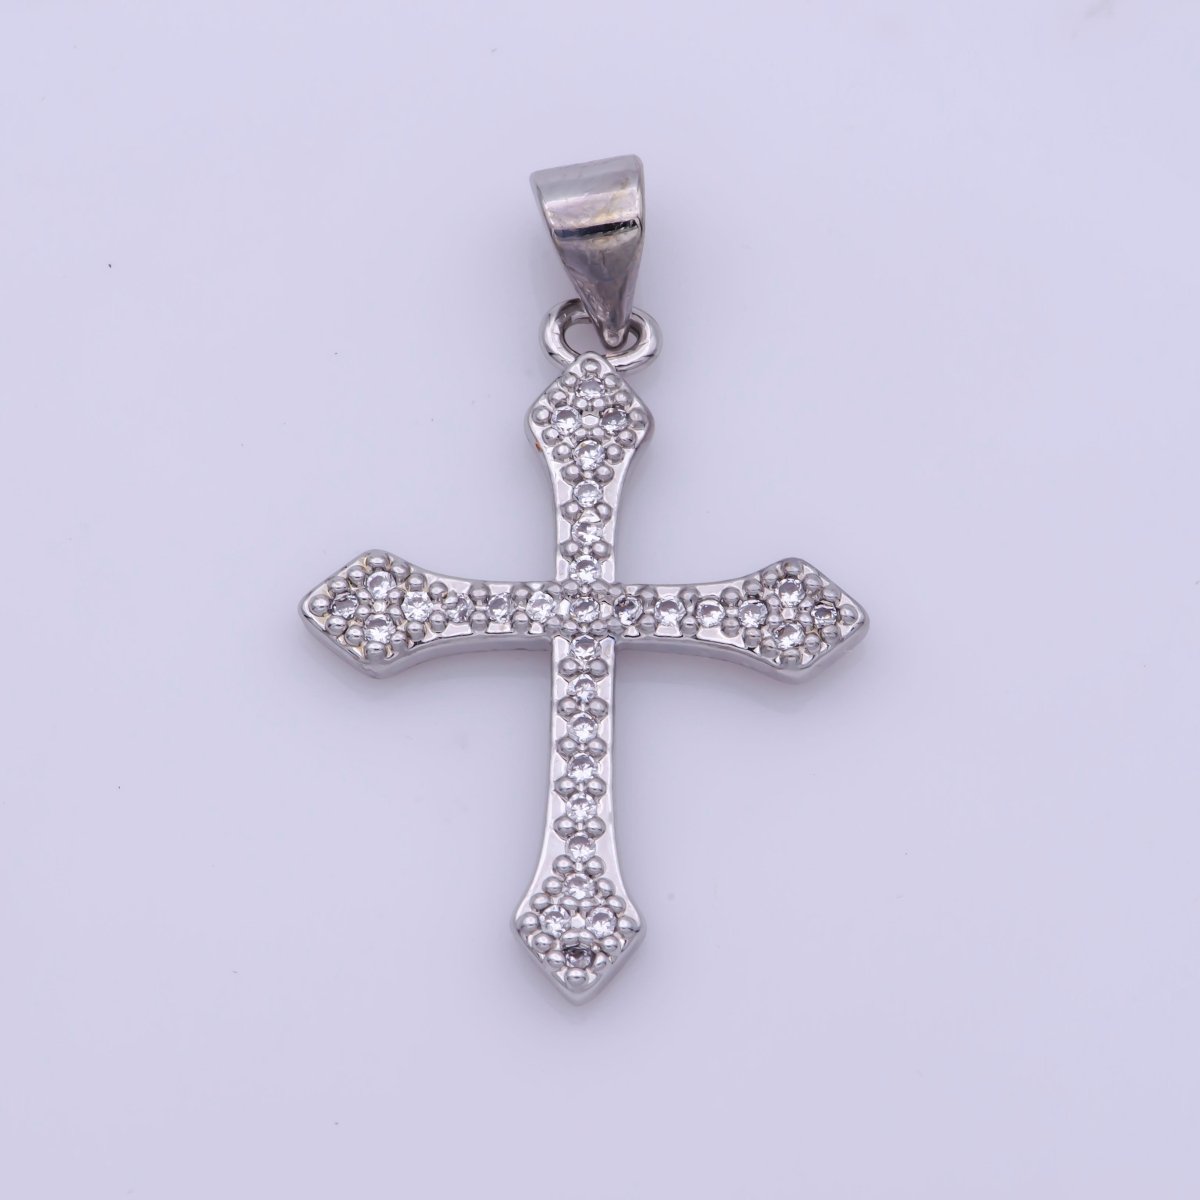 Rhodium Plated, 14K Gold Filled Cubic Zirconia Pave Cross Charm, Silver Cross Pendant CZ Micro Pave Cross, Ornate Cross Pendant, CZ Cross Layer Necklace, Elegance Cross, Cubic Zirconia Necklace Pendant Charm Bails Findings for Jewelry Making H-188 - DLUXCA